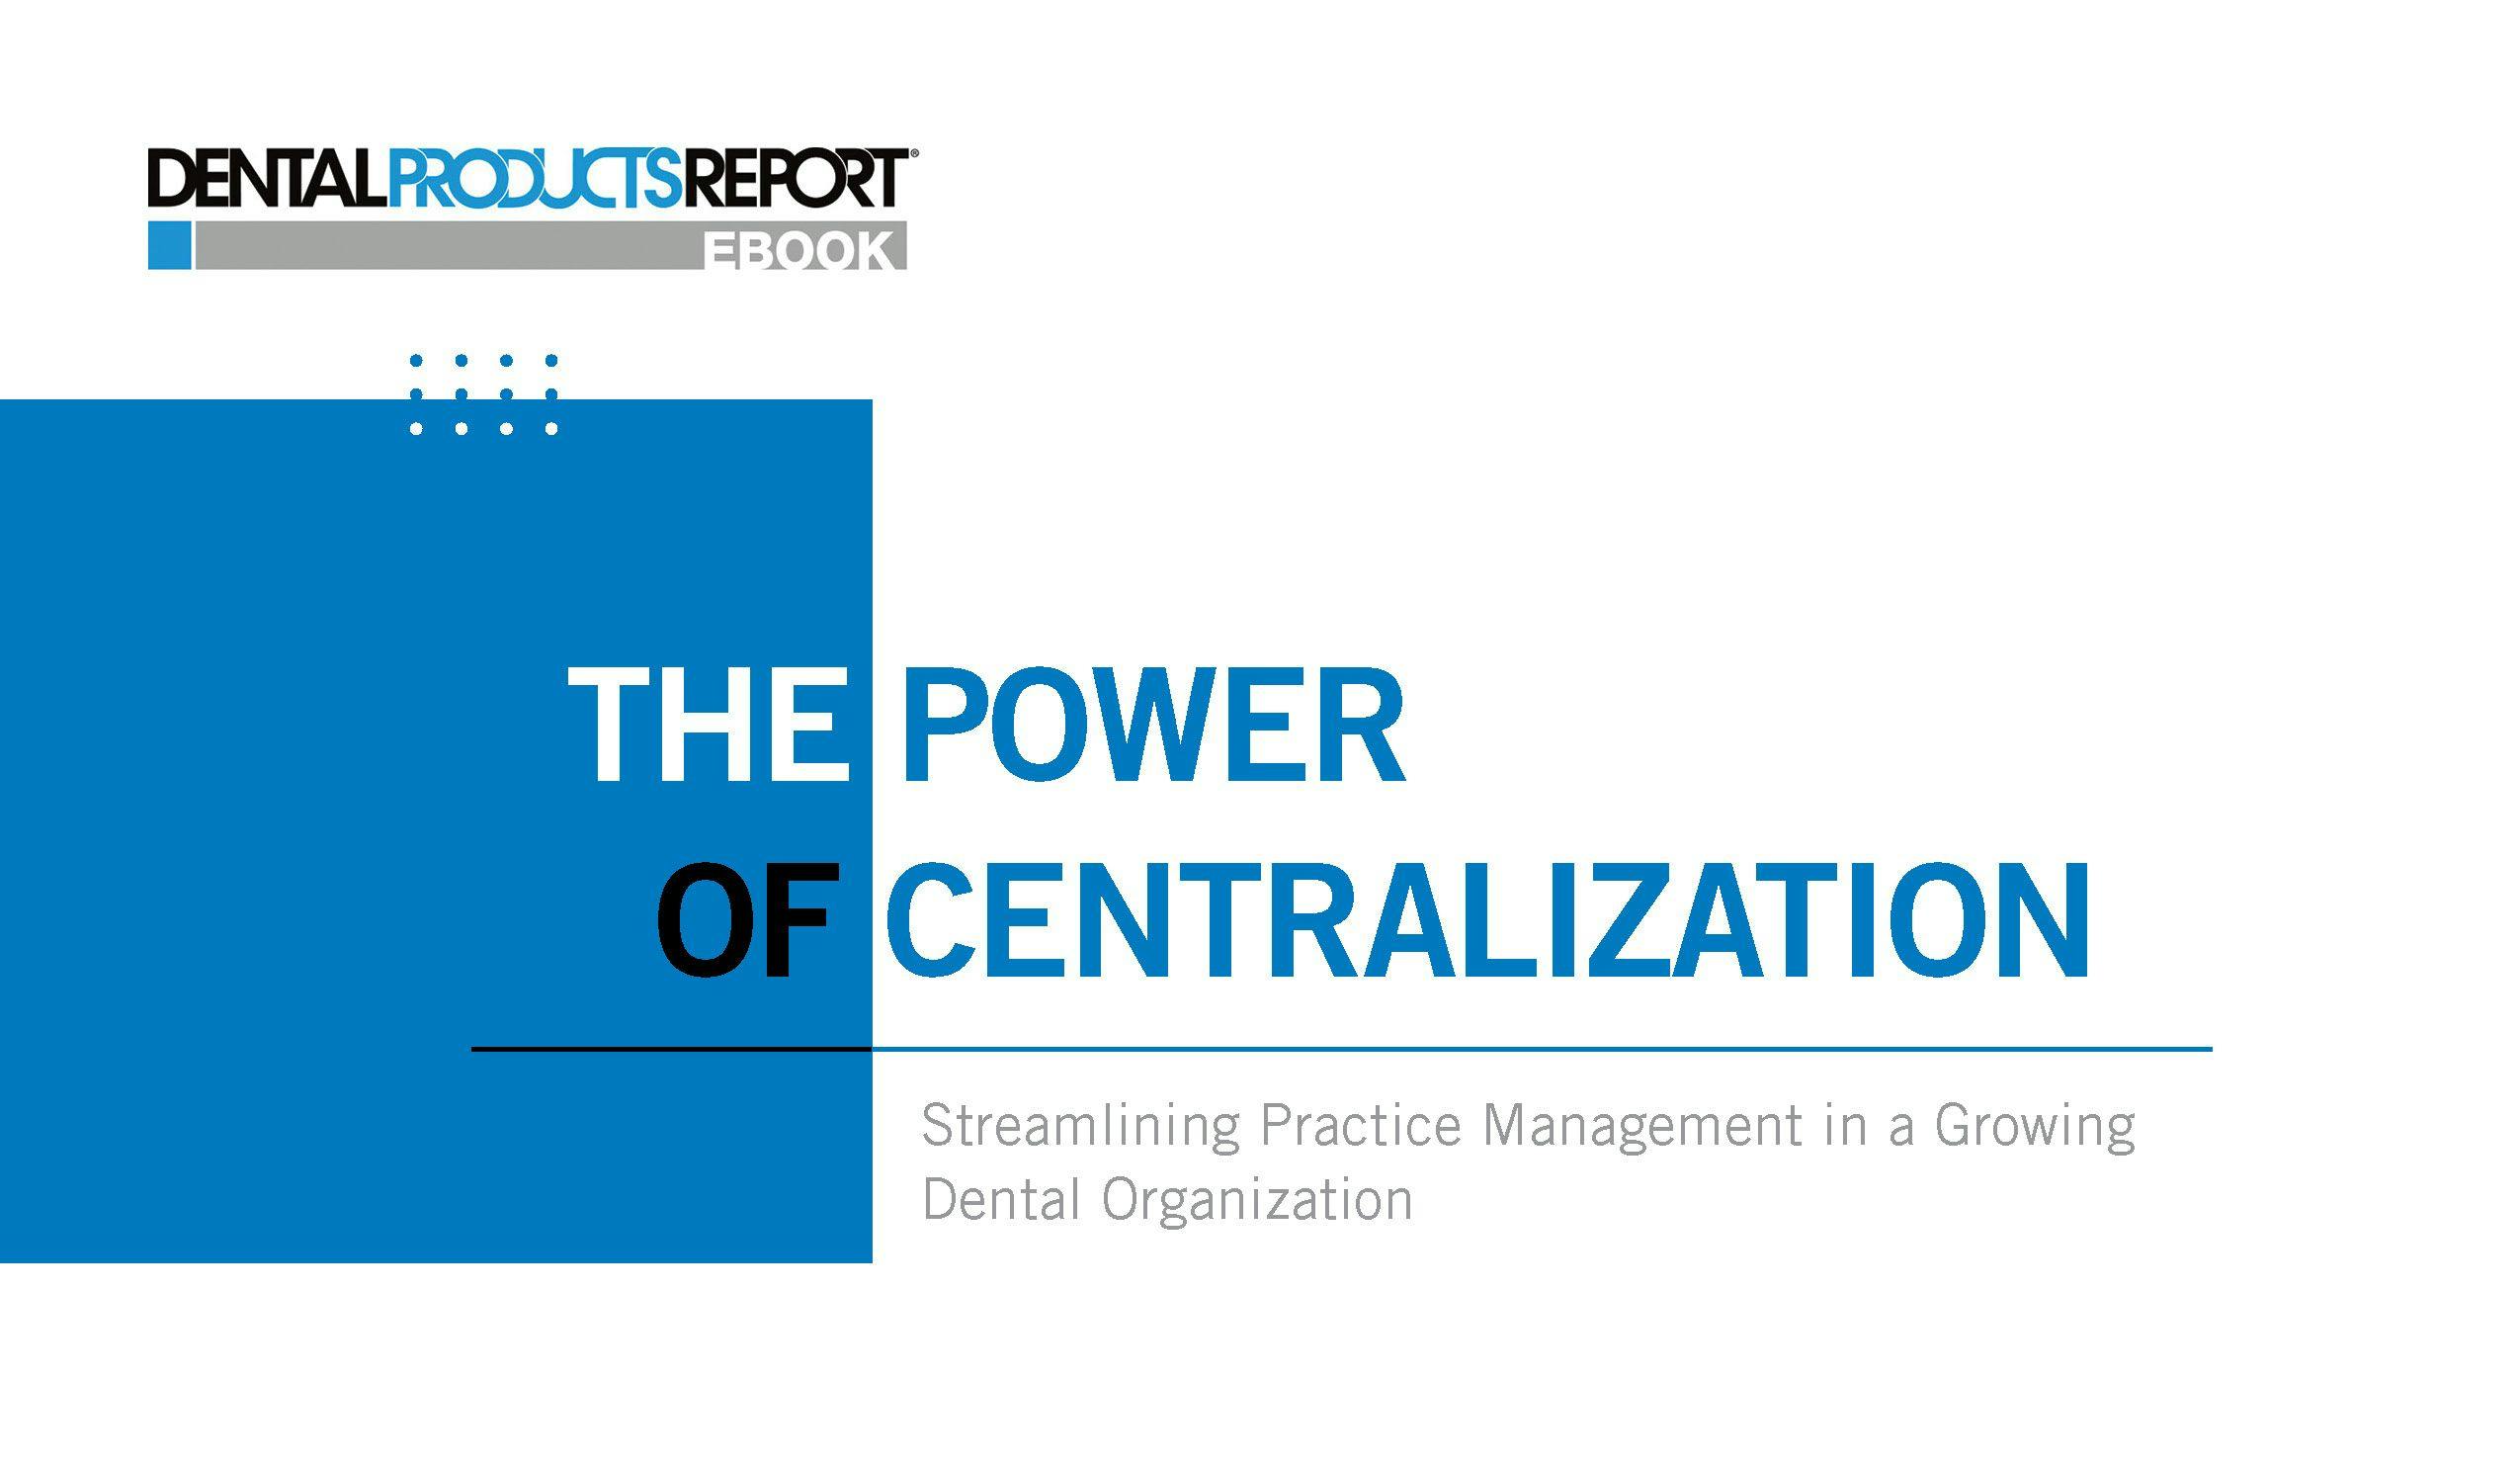 The Power of Centralization e-book